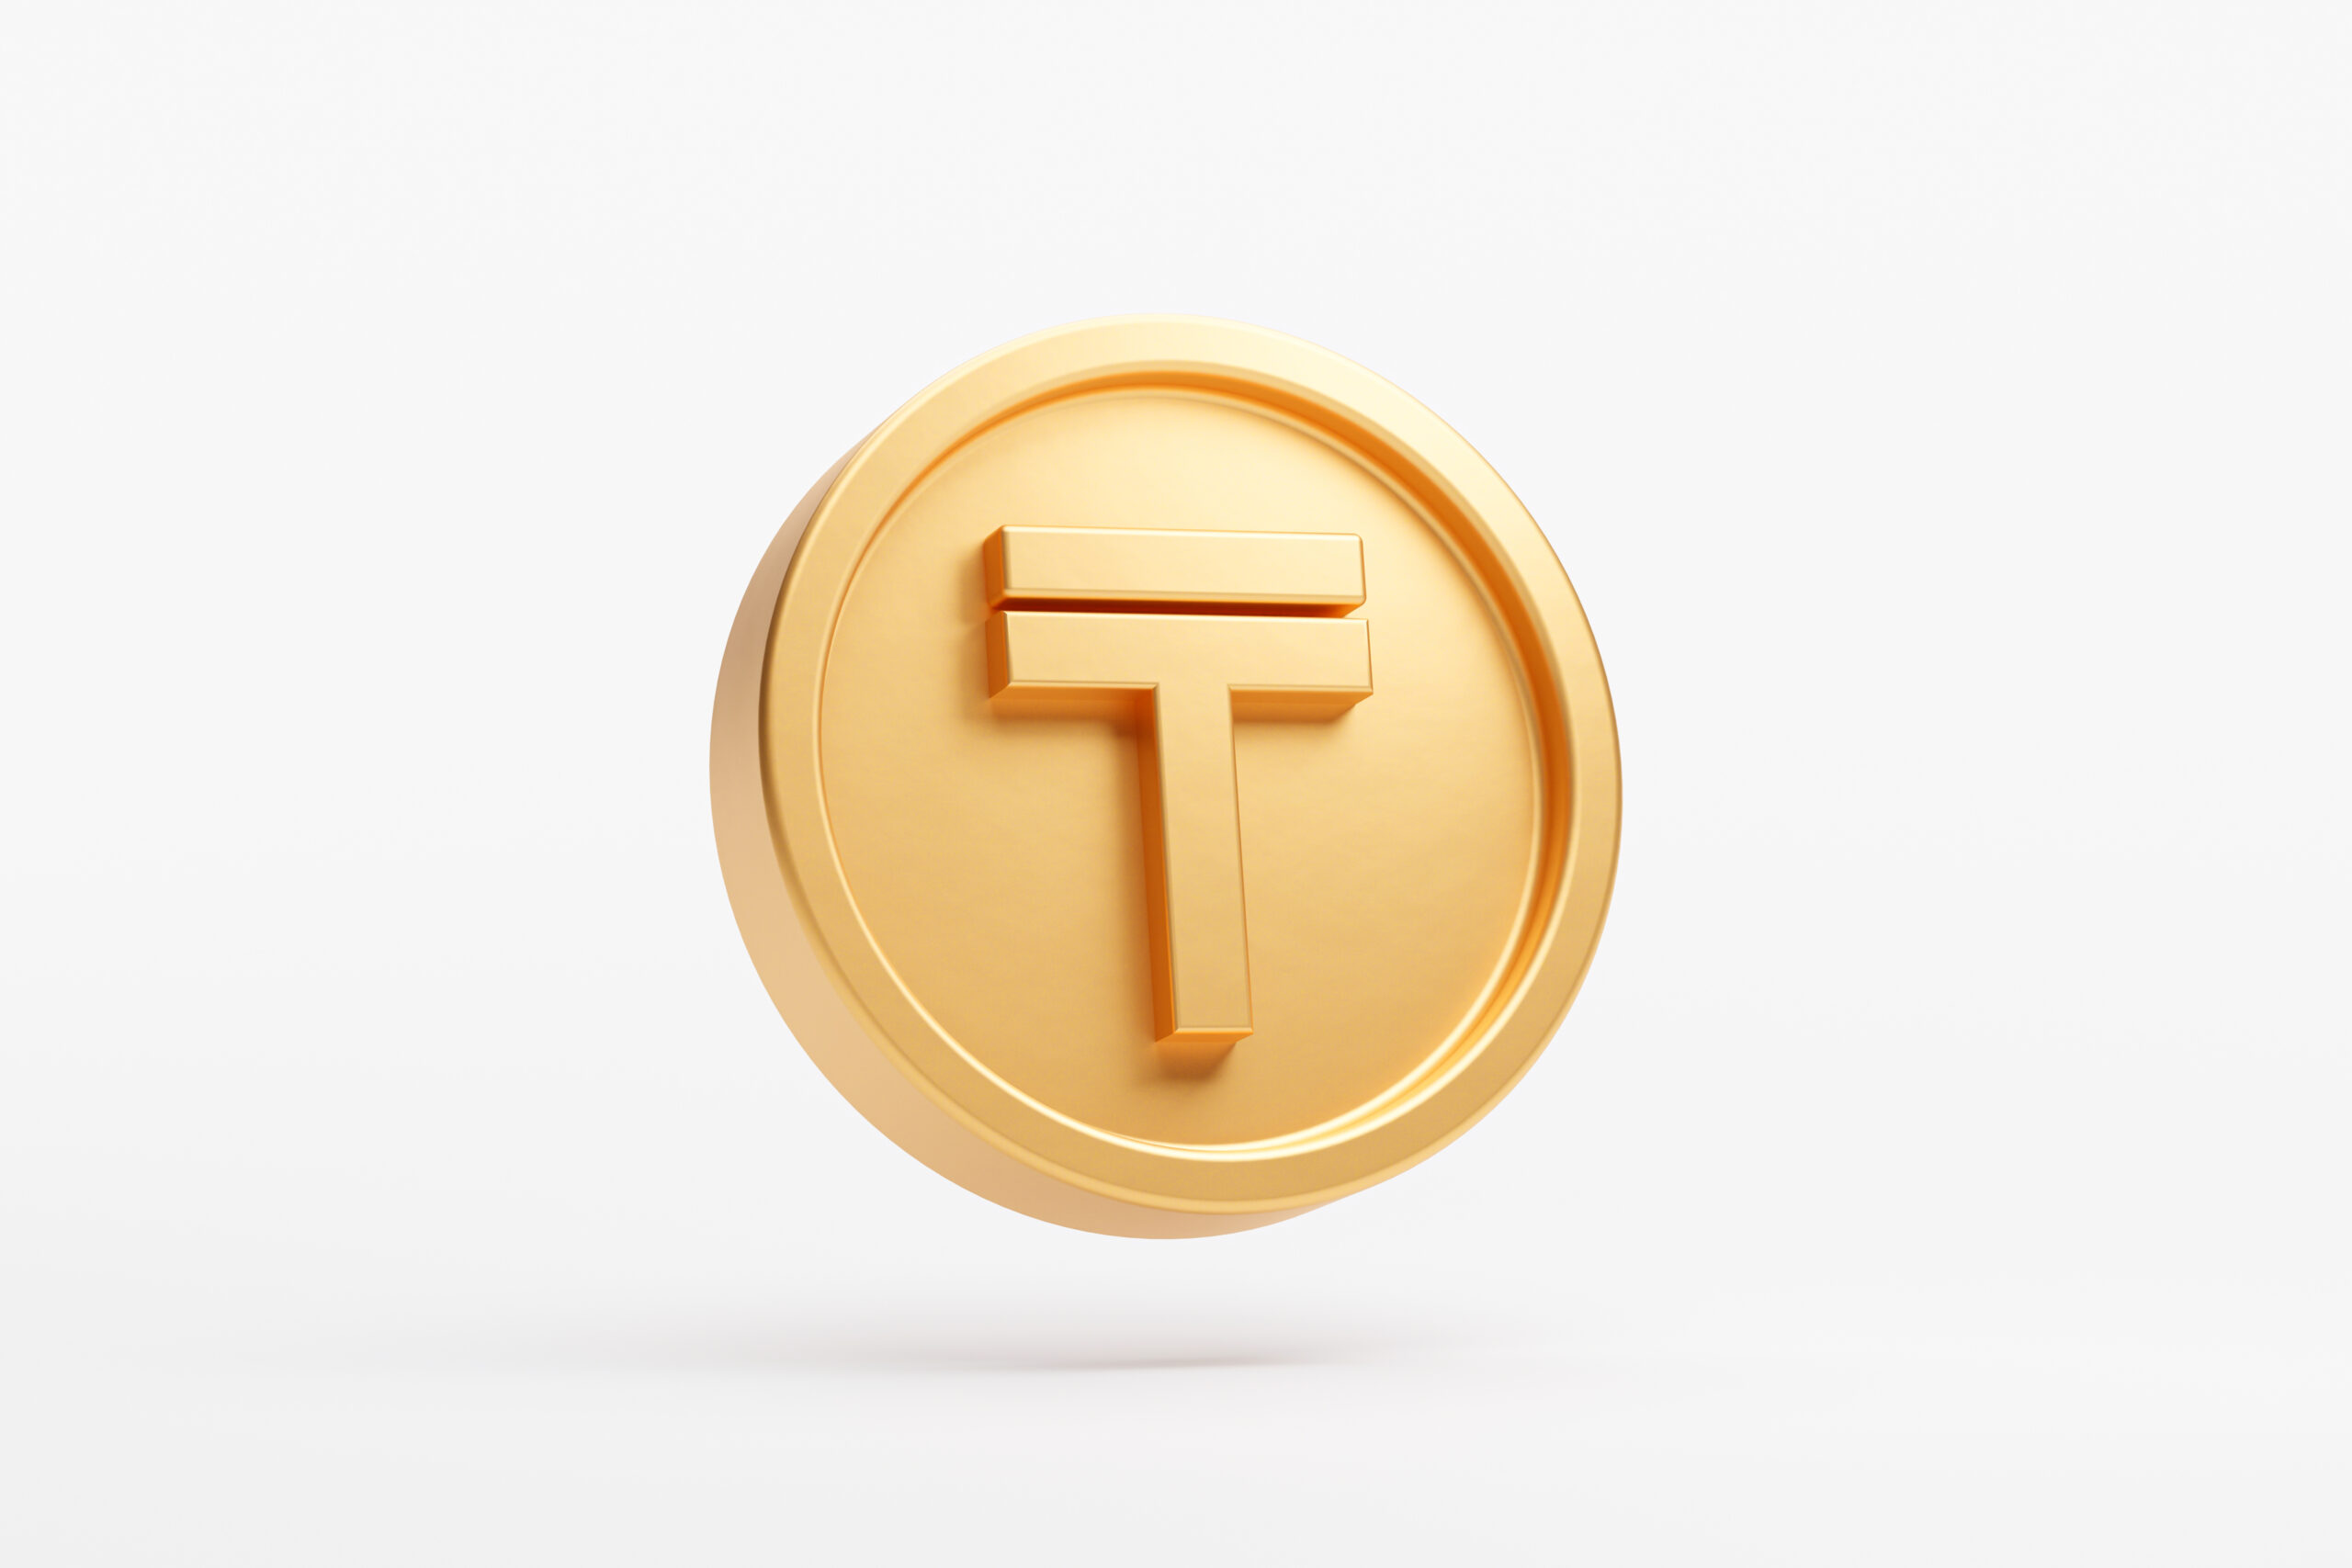 Tether Announces Strategic Investment and Launch of XAU1 Stablecoin